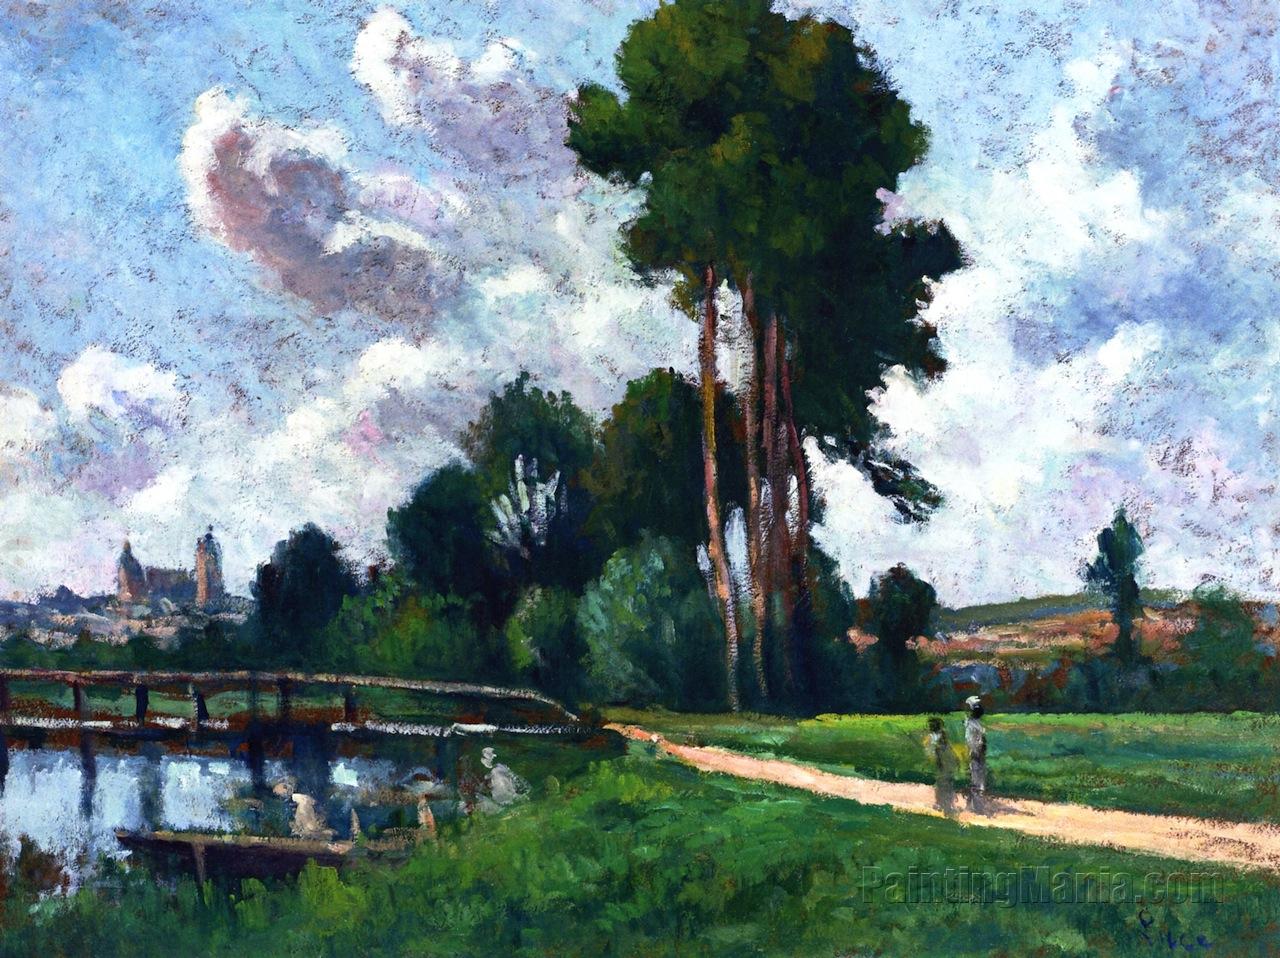 Auxerre, Landscape by the River